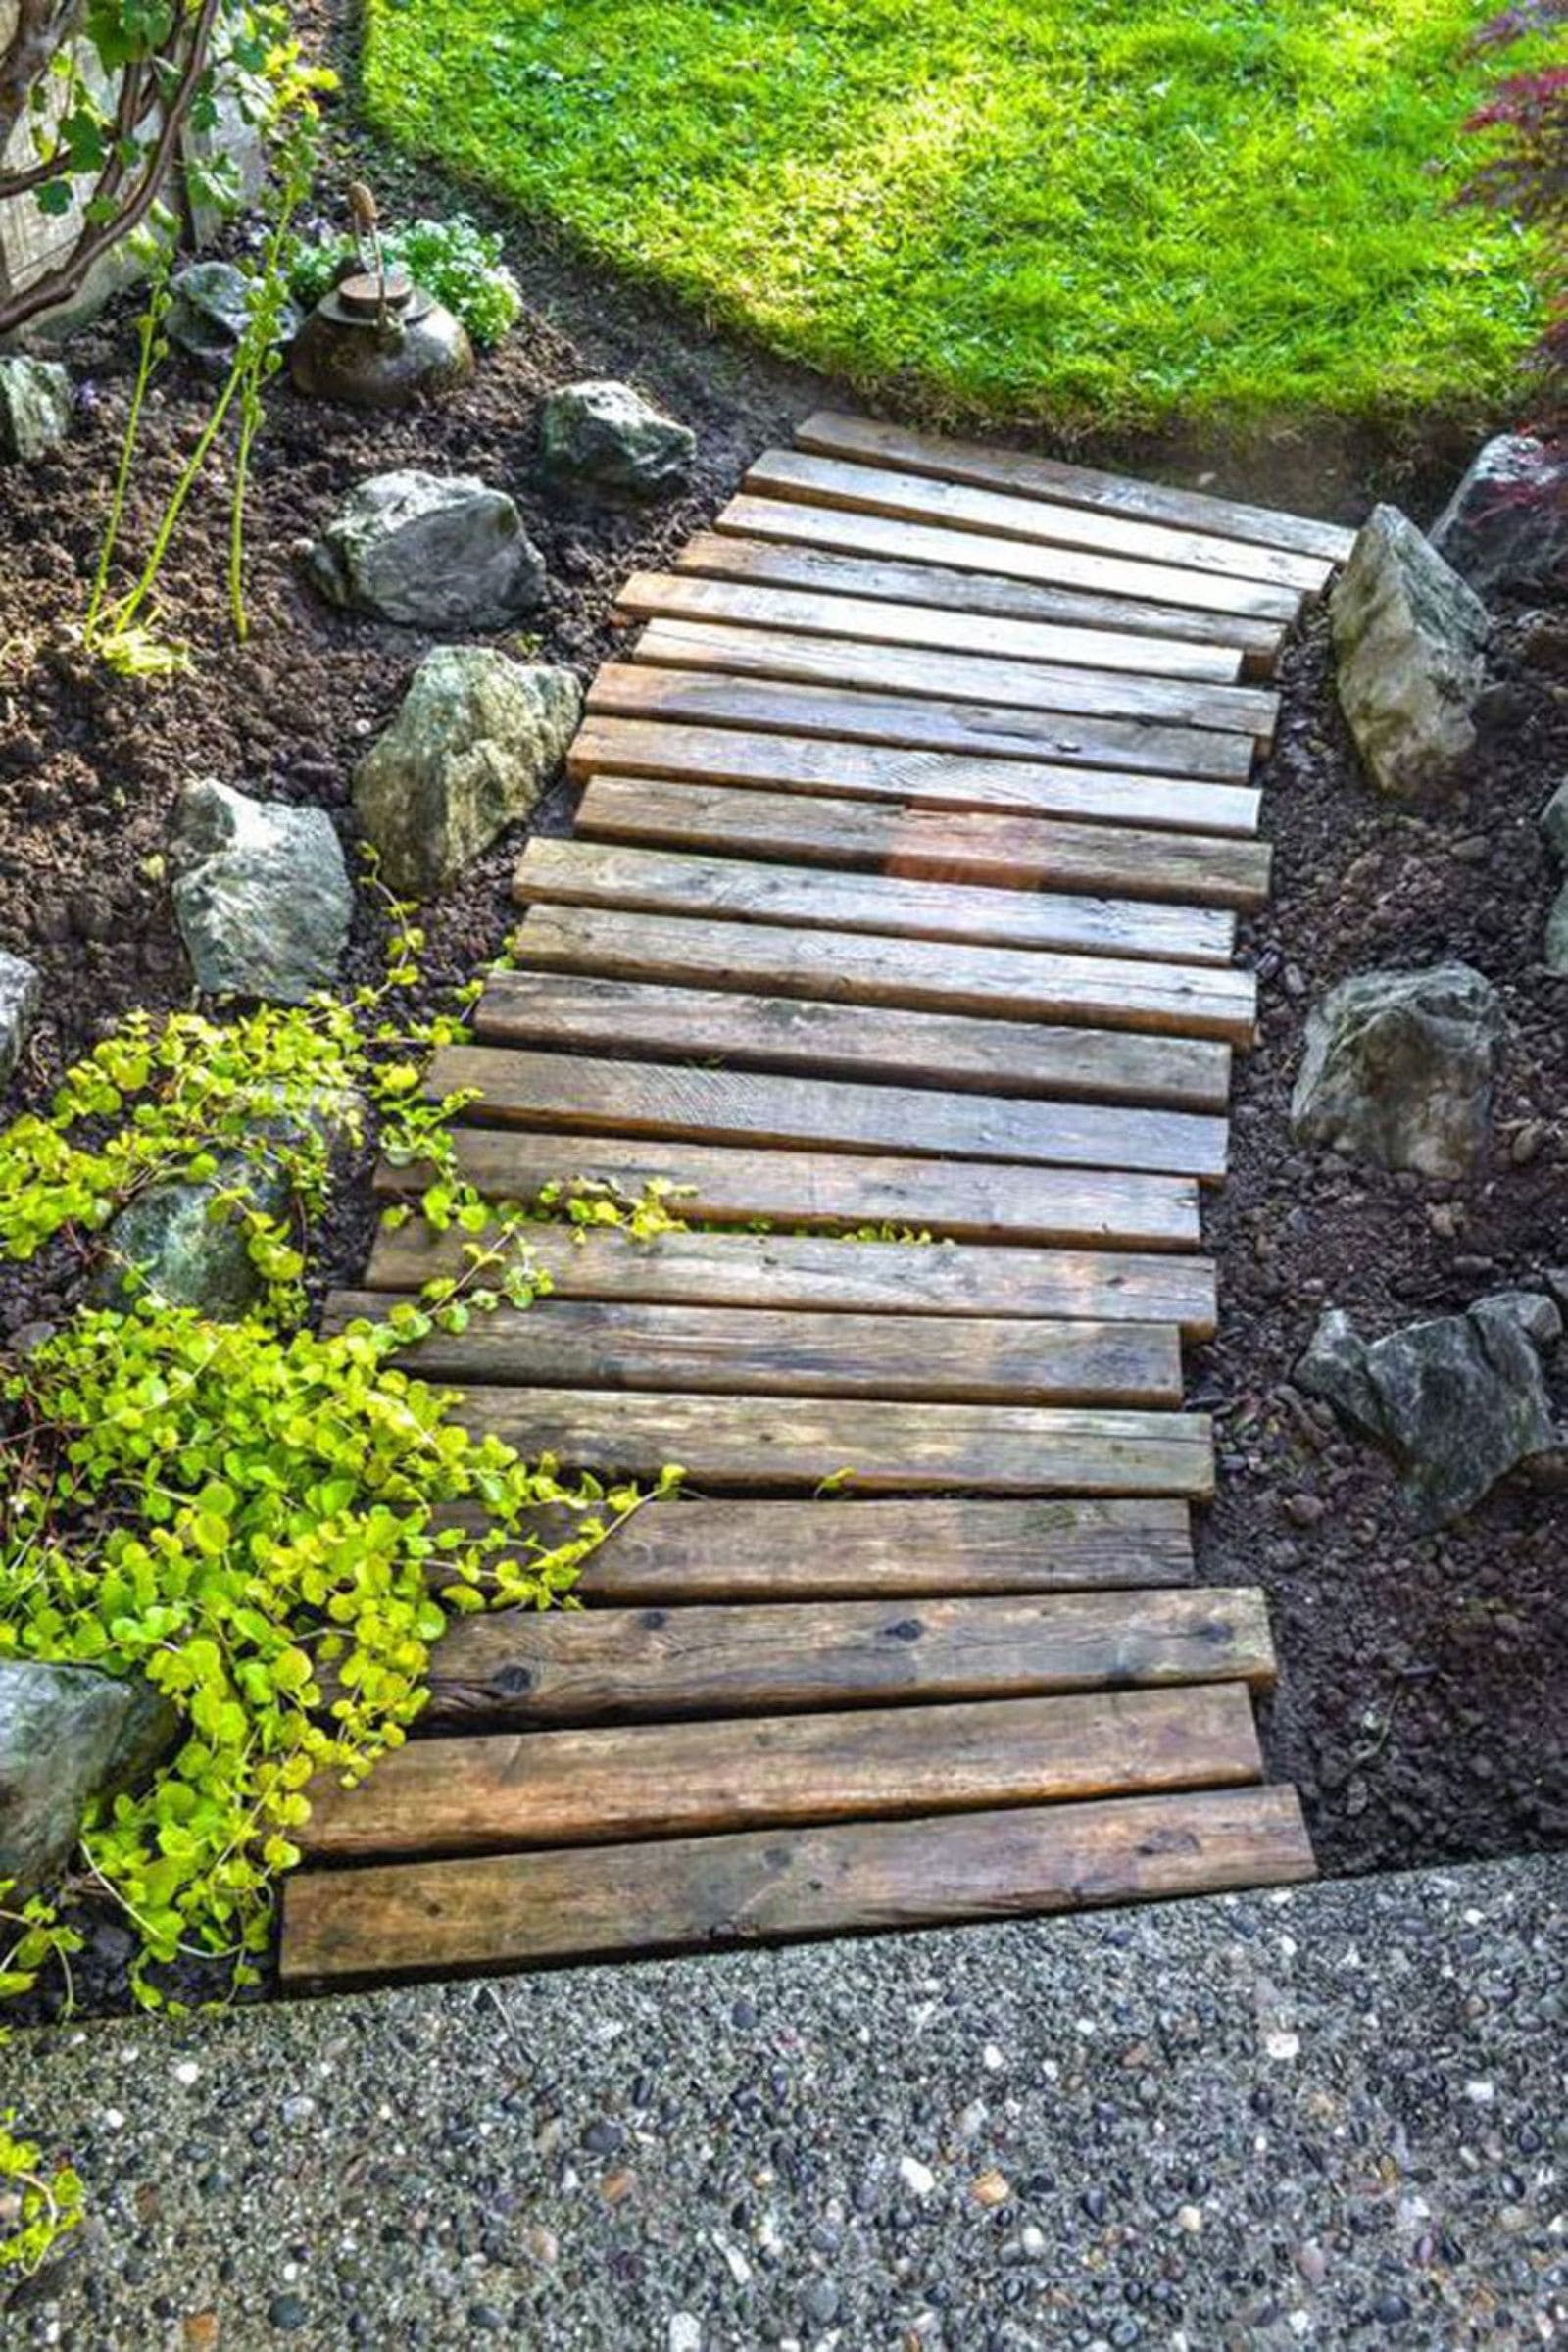 20 ideas for landscaping gardens and backyards with pallets - 149